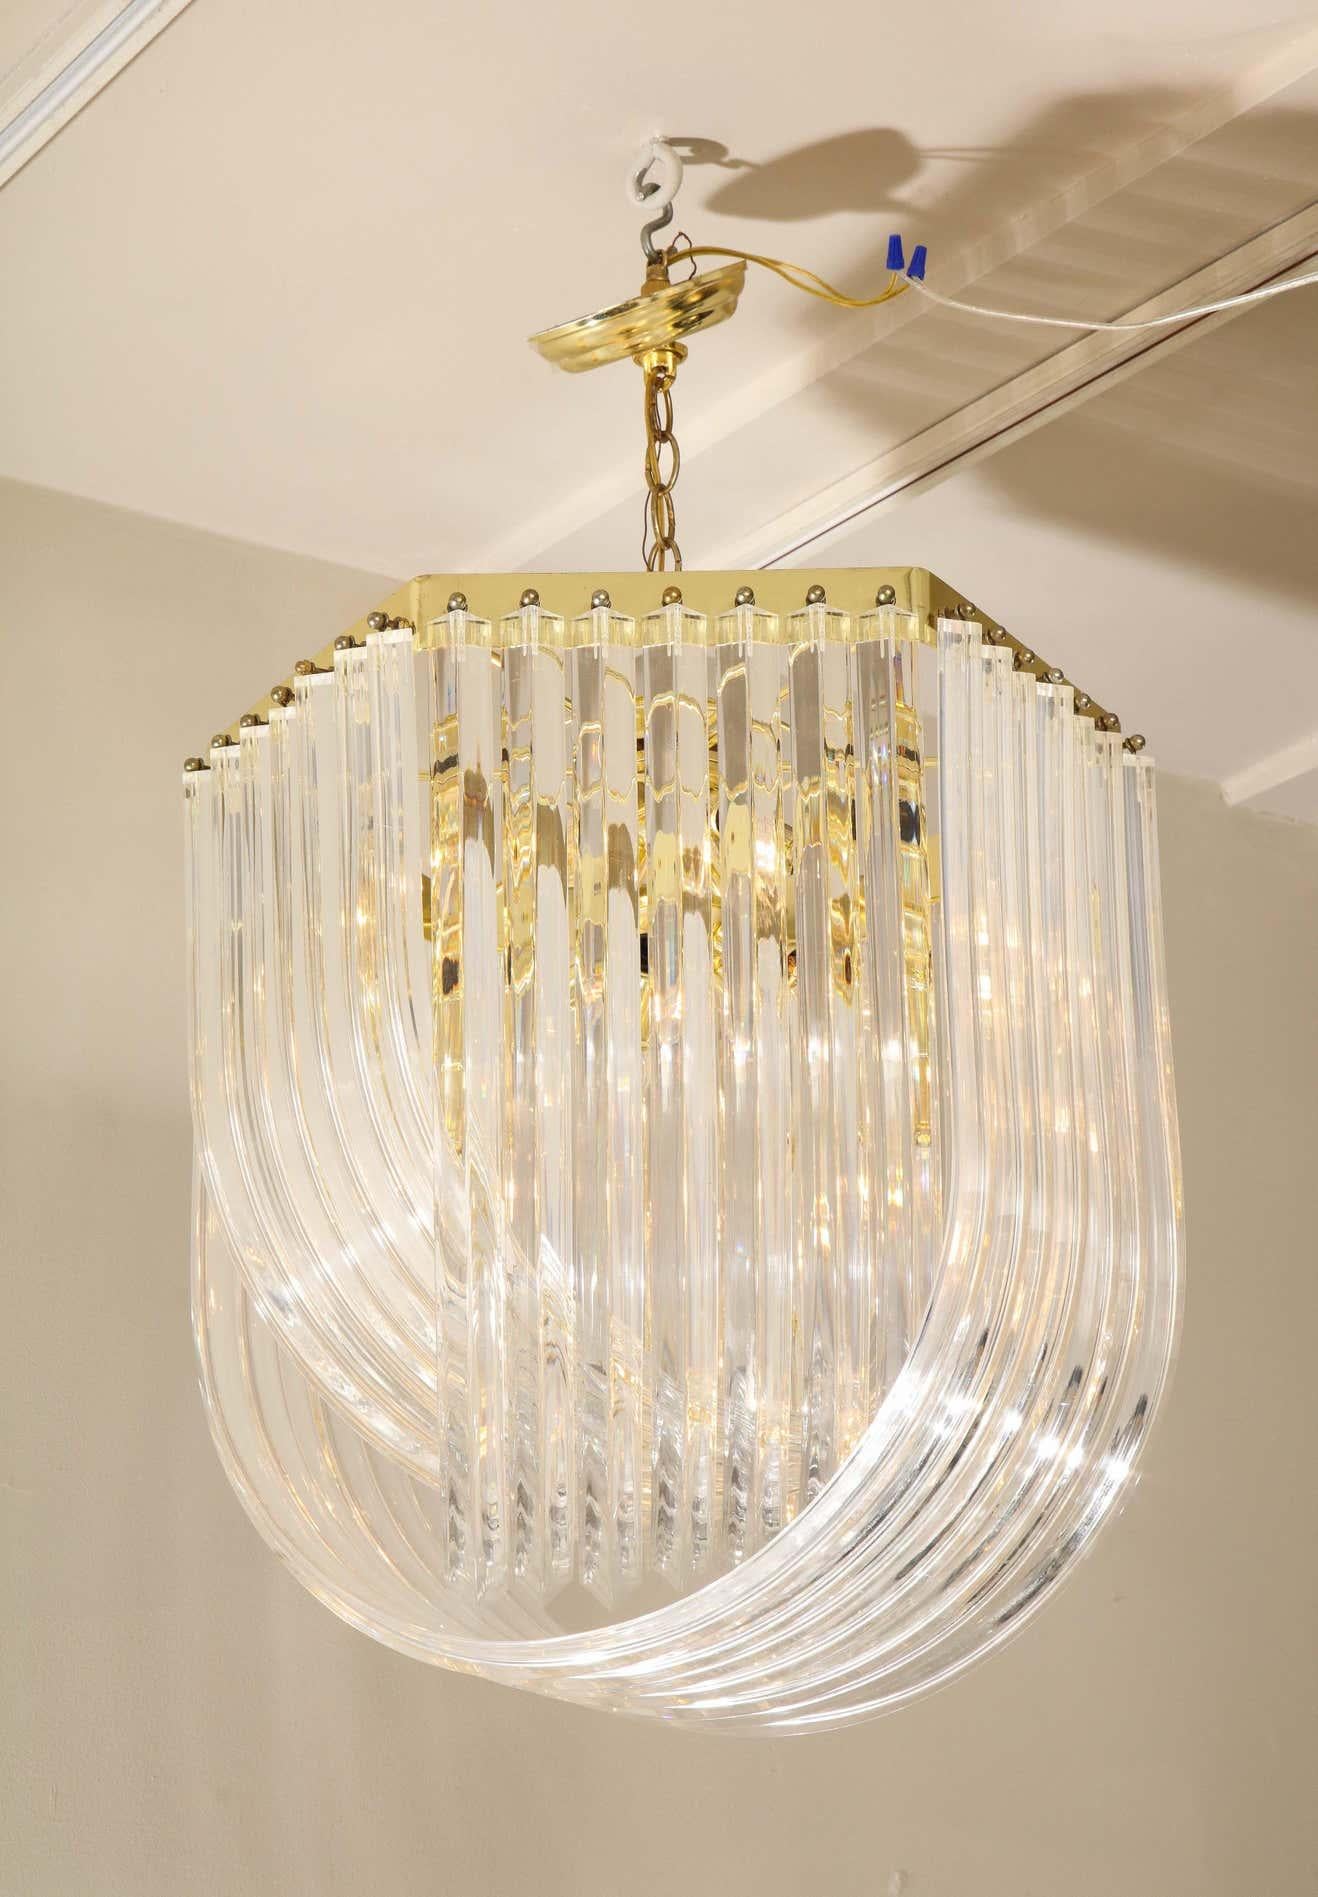 Midcentury Curved Lucite Ribbon Chandelier in Brass For Sale 3